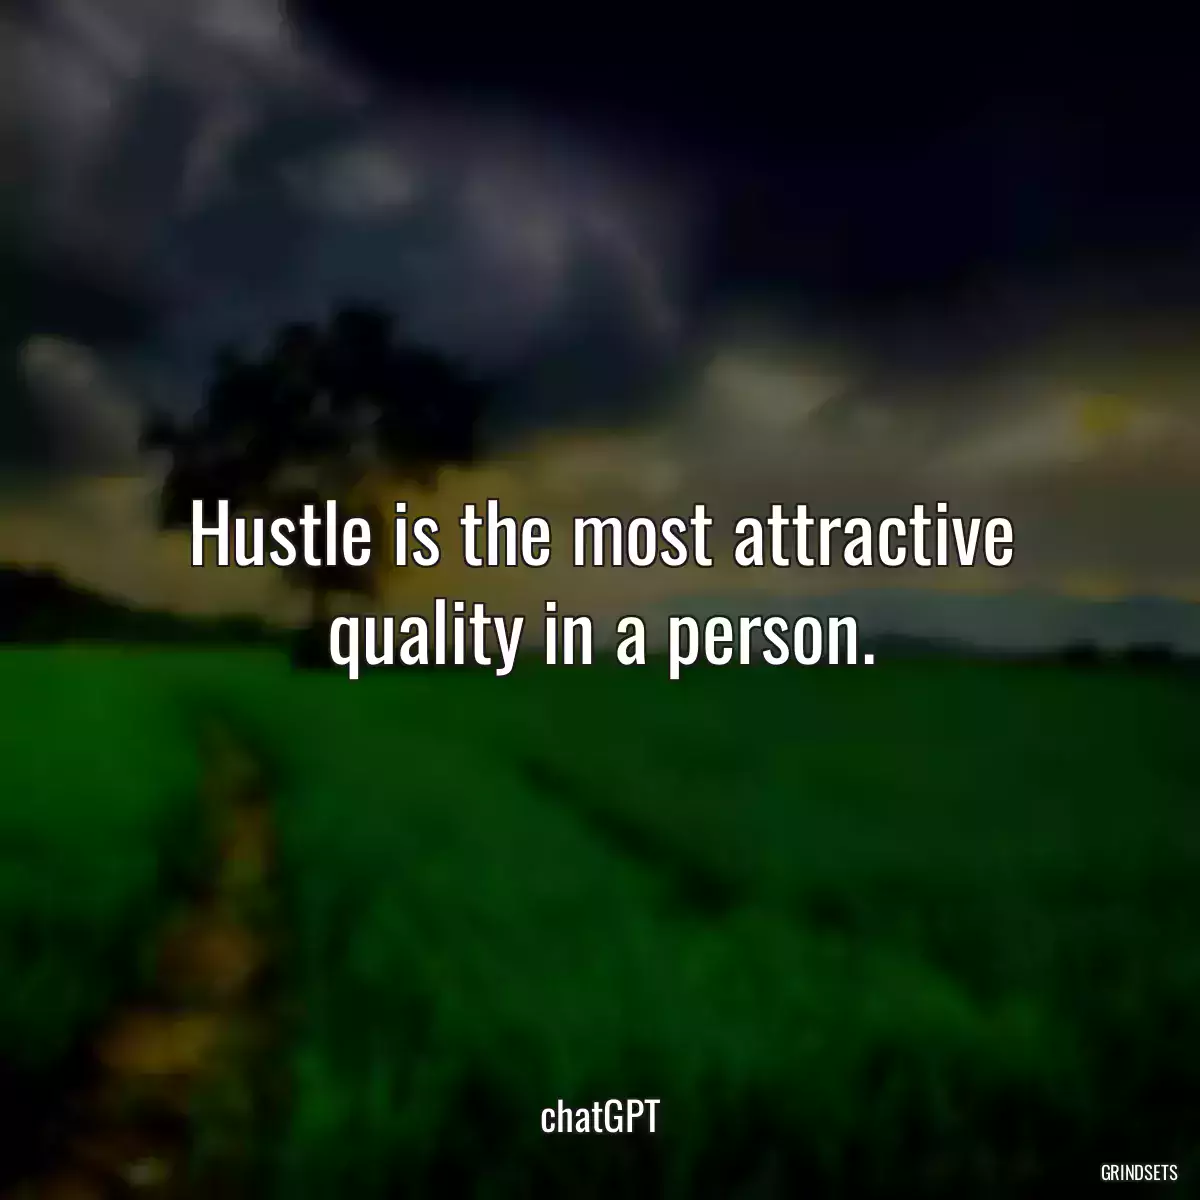 Hustle is the most attractive quality in a person.